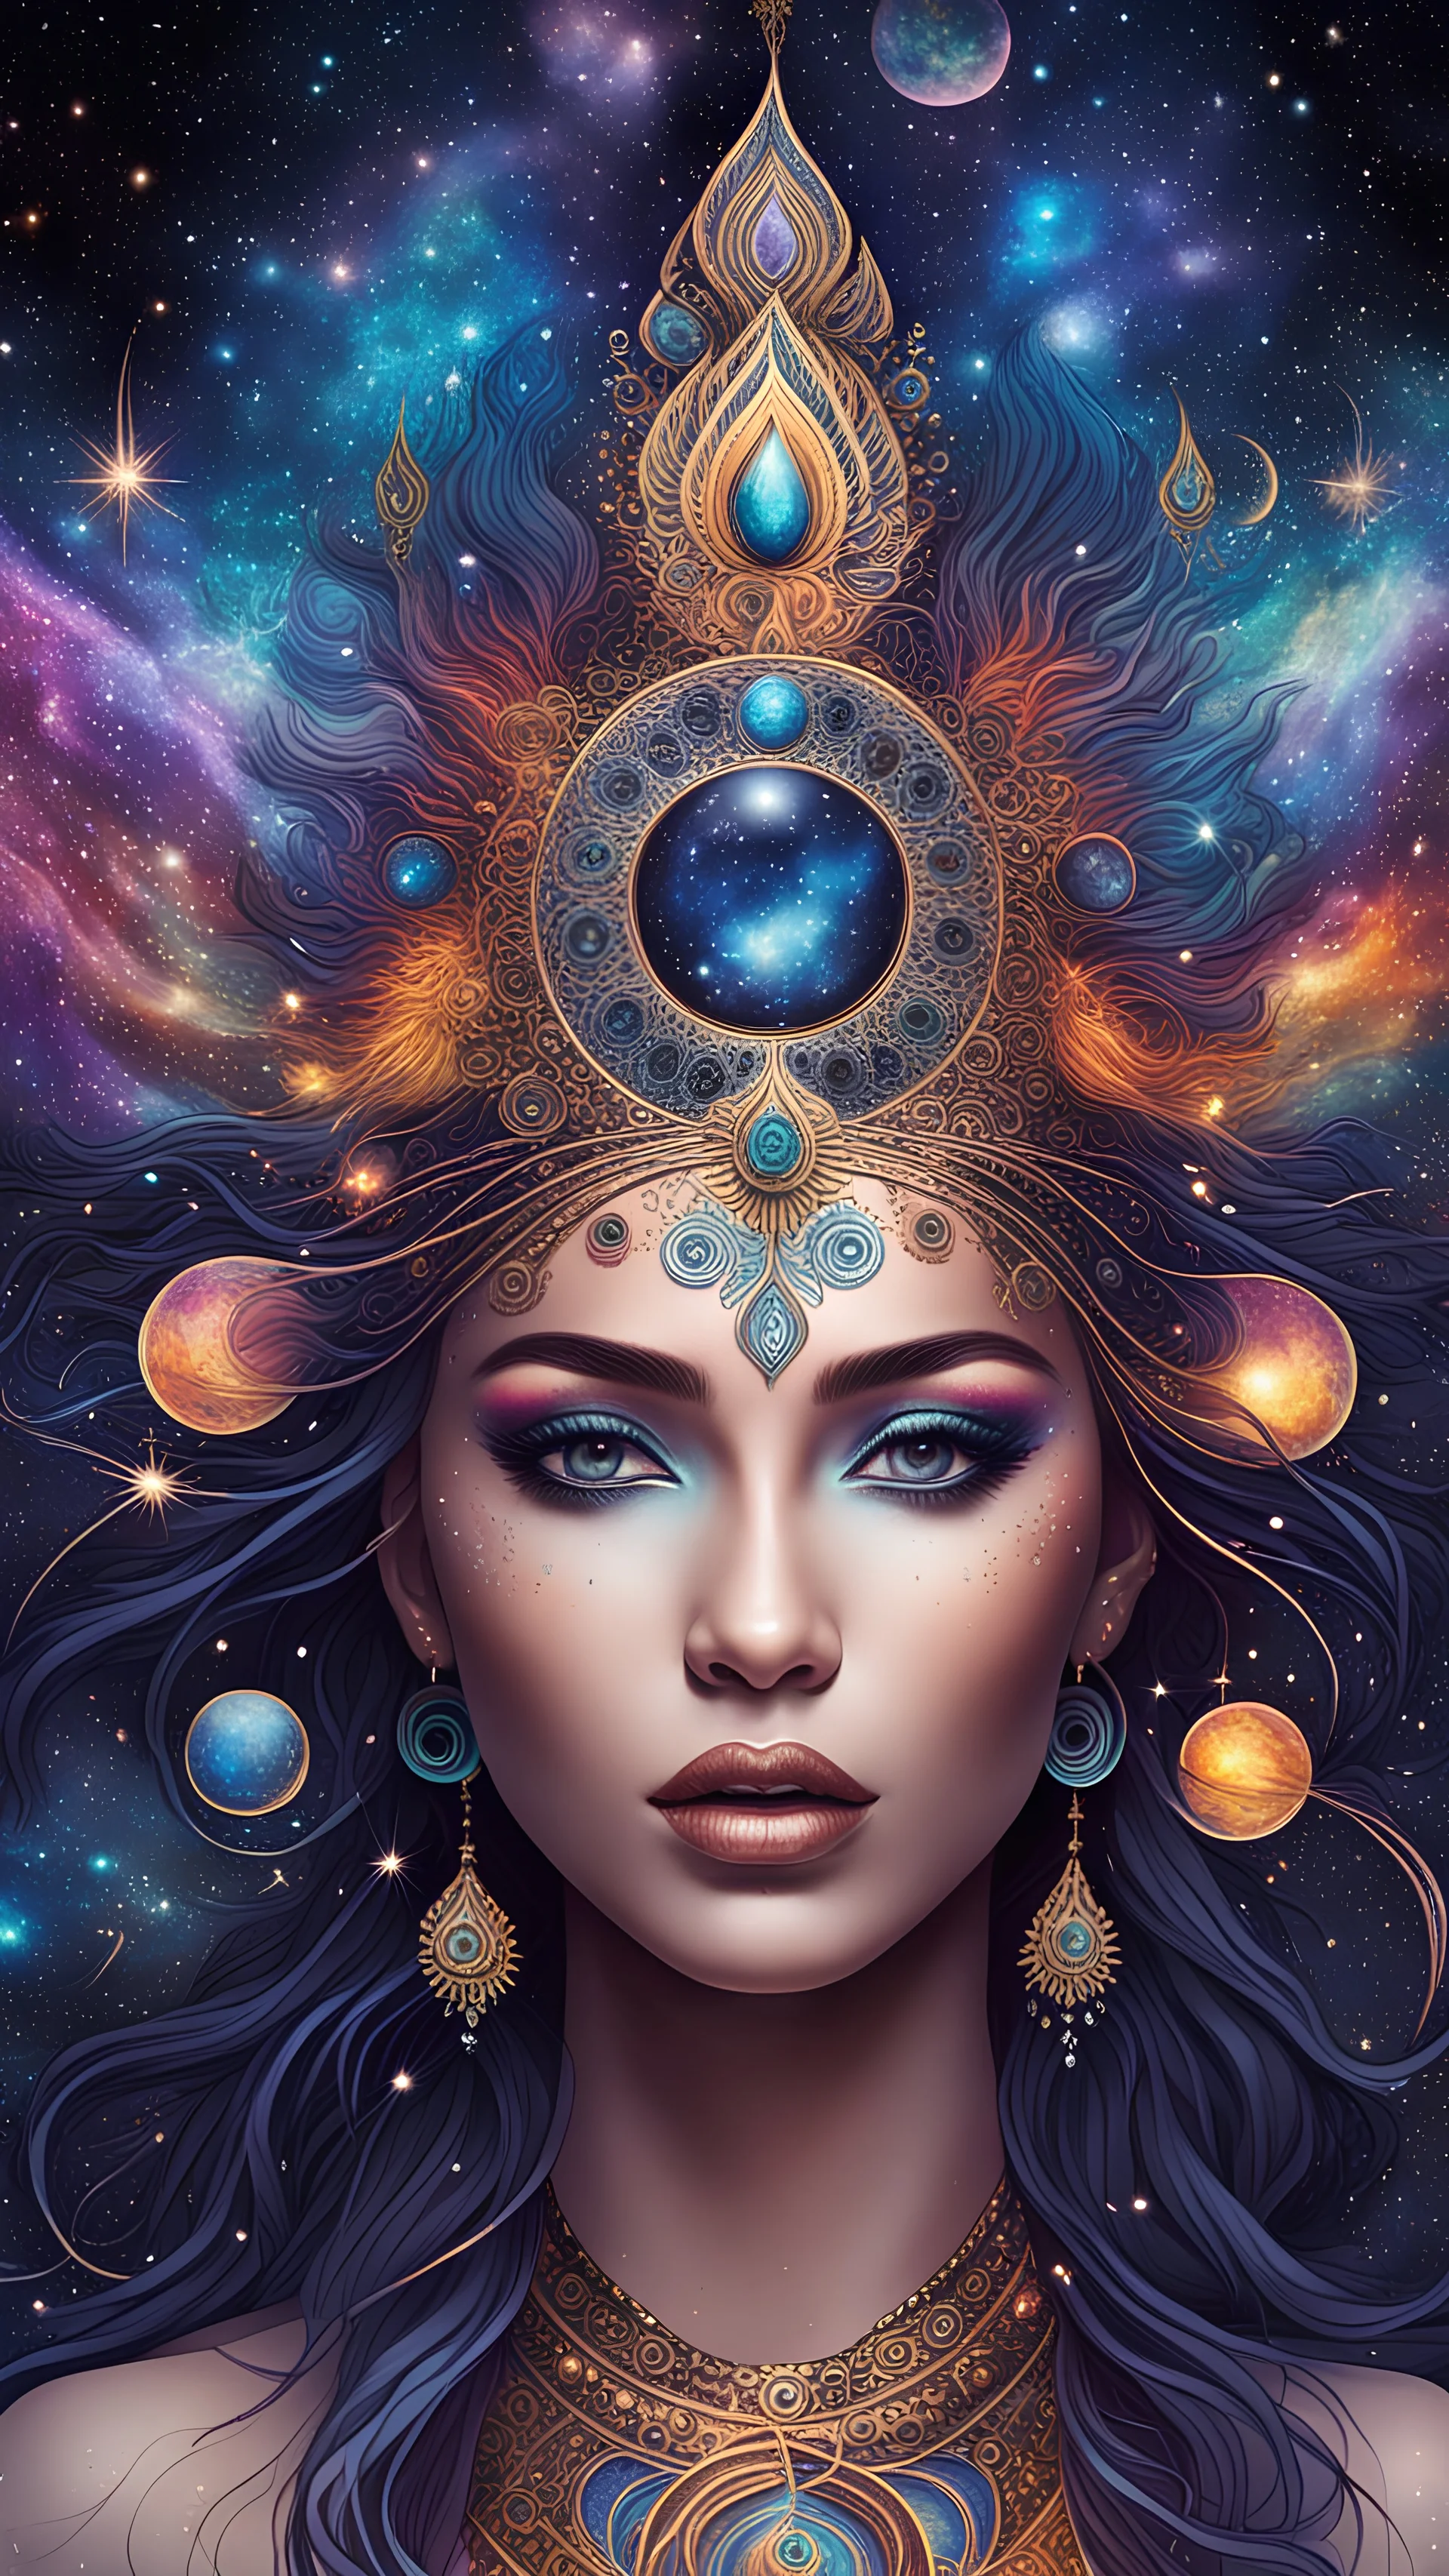 an image of a celestial goddess with galaxies swirling in her eyes and cosmic energy emanating from her fingertips. Use intricate details to create a cosmic headdress and incorporate vivid colors to represent the vastness of the universe